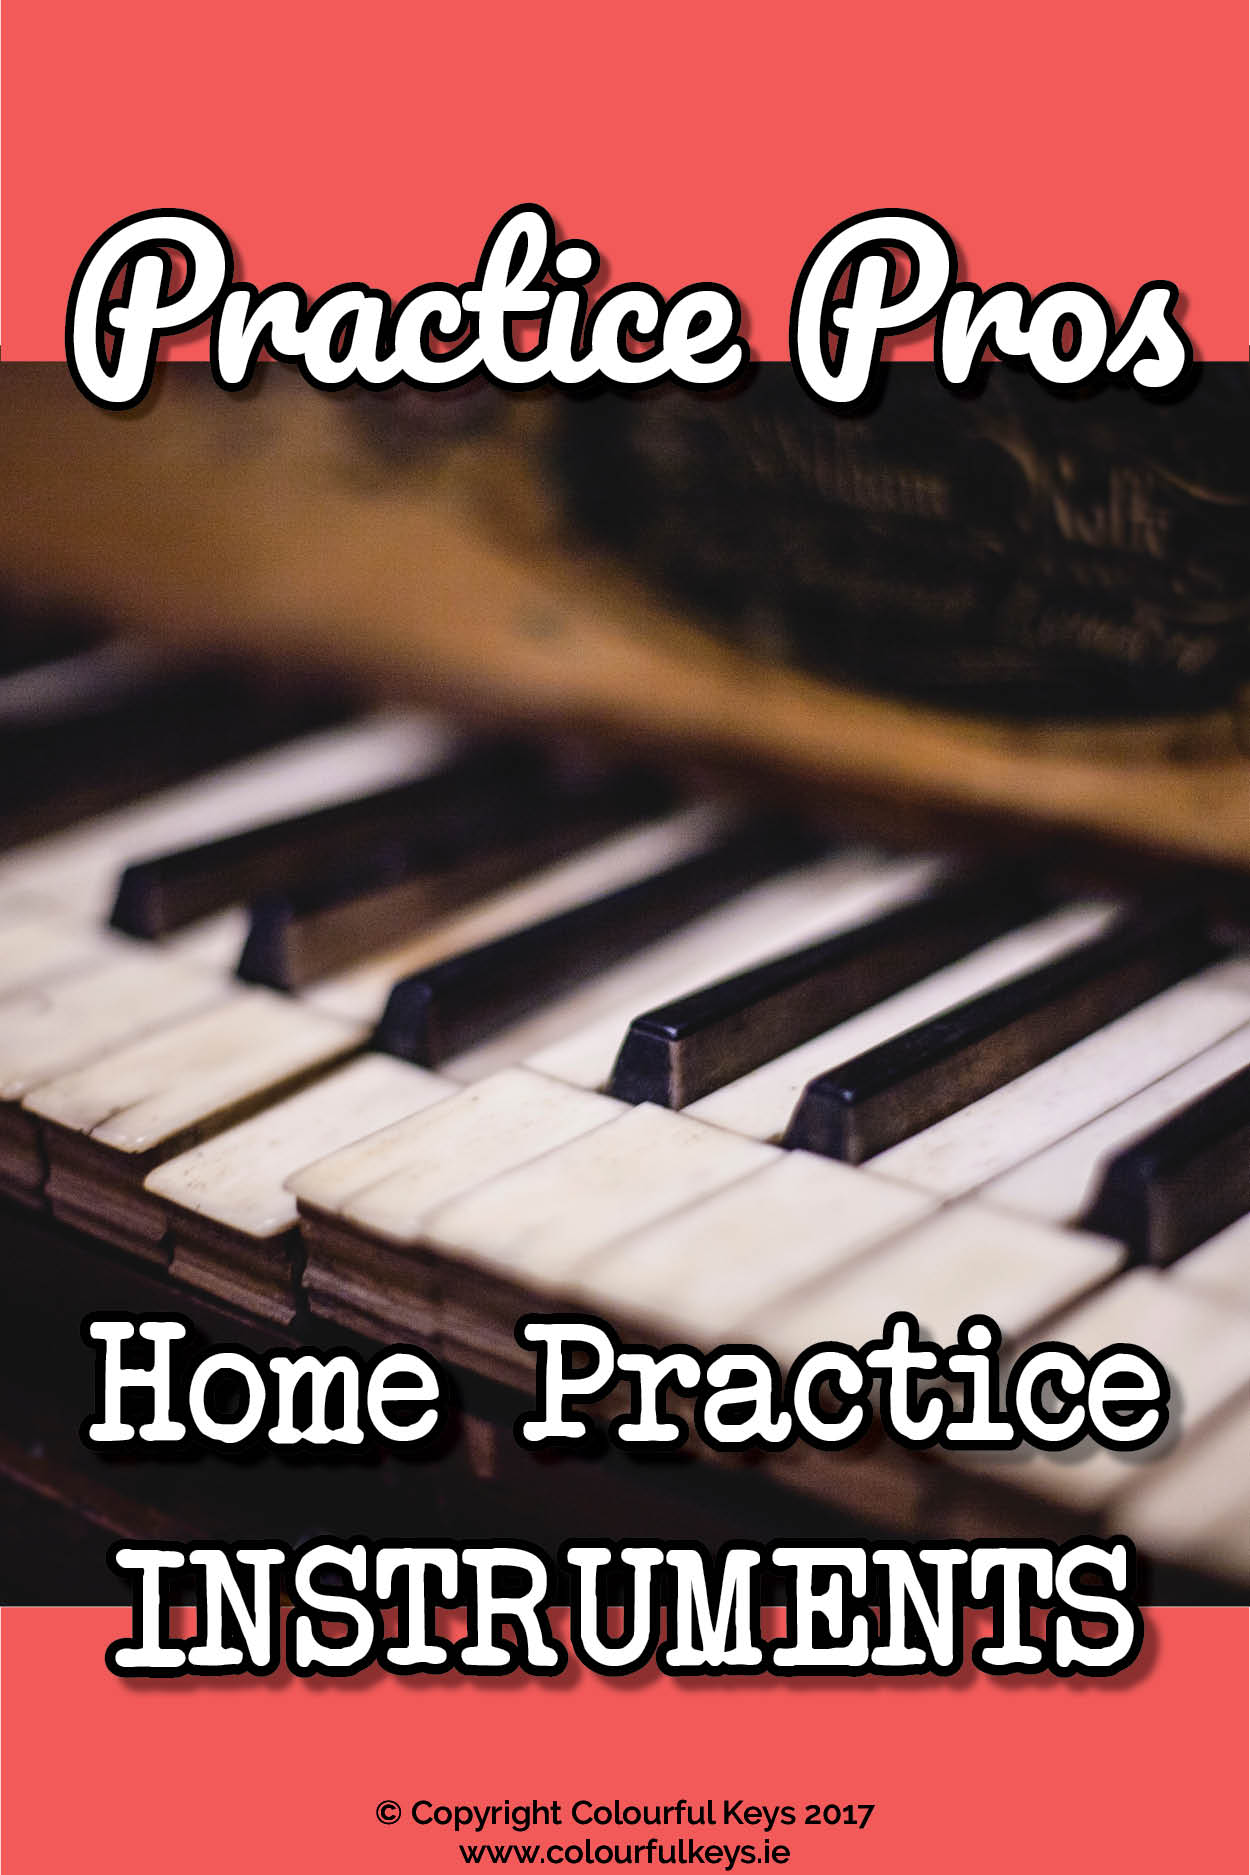 Make sure your students have a great practice instrument at home with these tips!